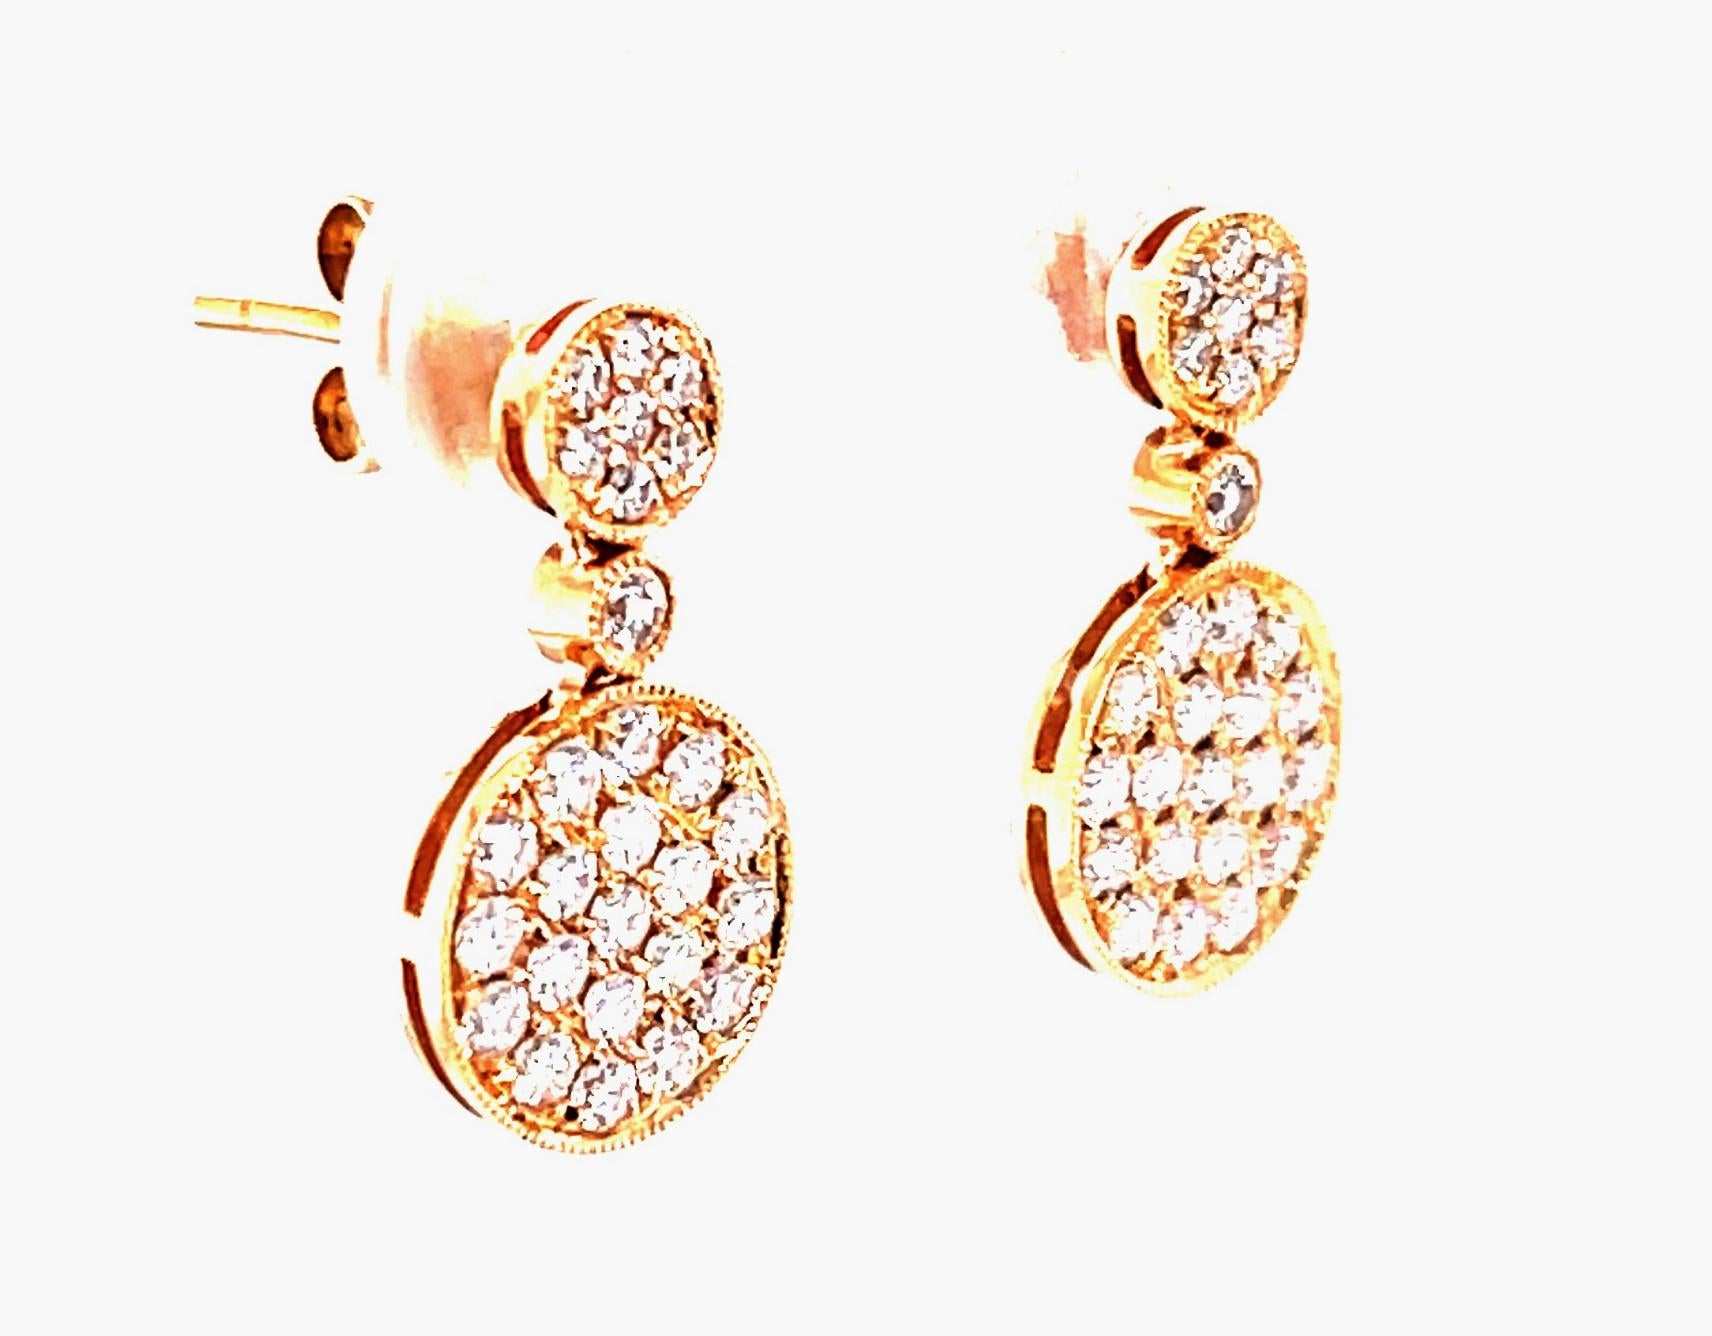 Modern, yet classic, these unique 18k rose gold and diamond earrings are extremely versatile!  Sparkling pave-set diamond discs sit on and just below the earlobe for a tailored and elegant look that can be worn day or night. Timeless style with an